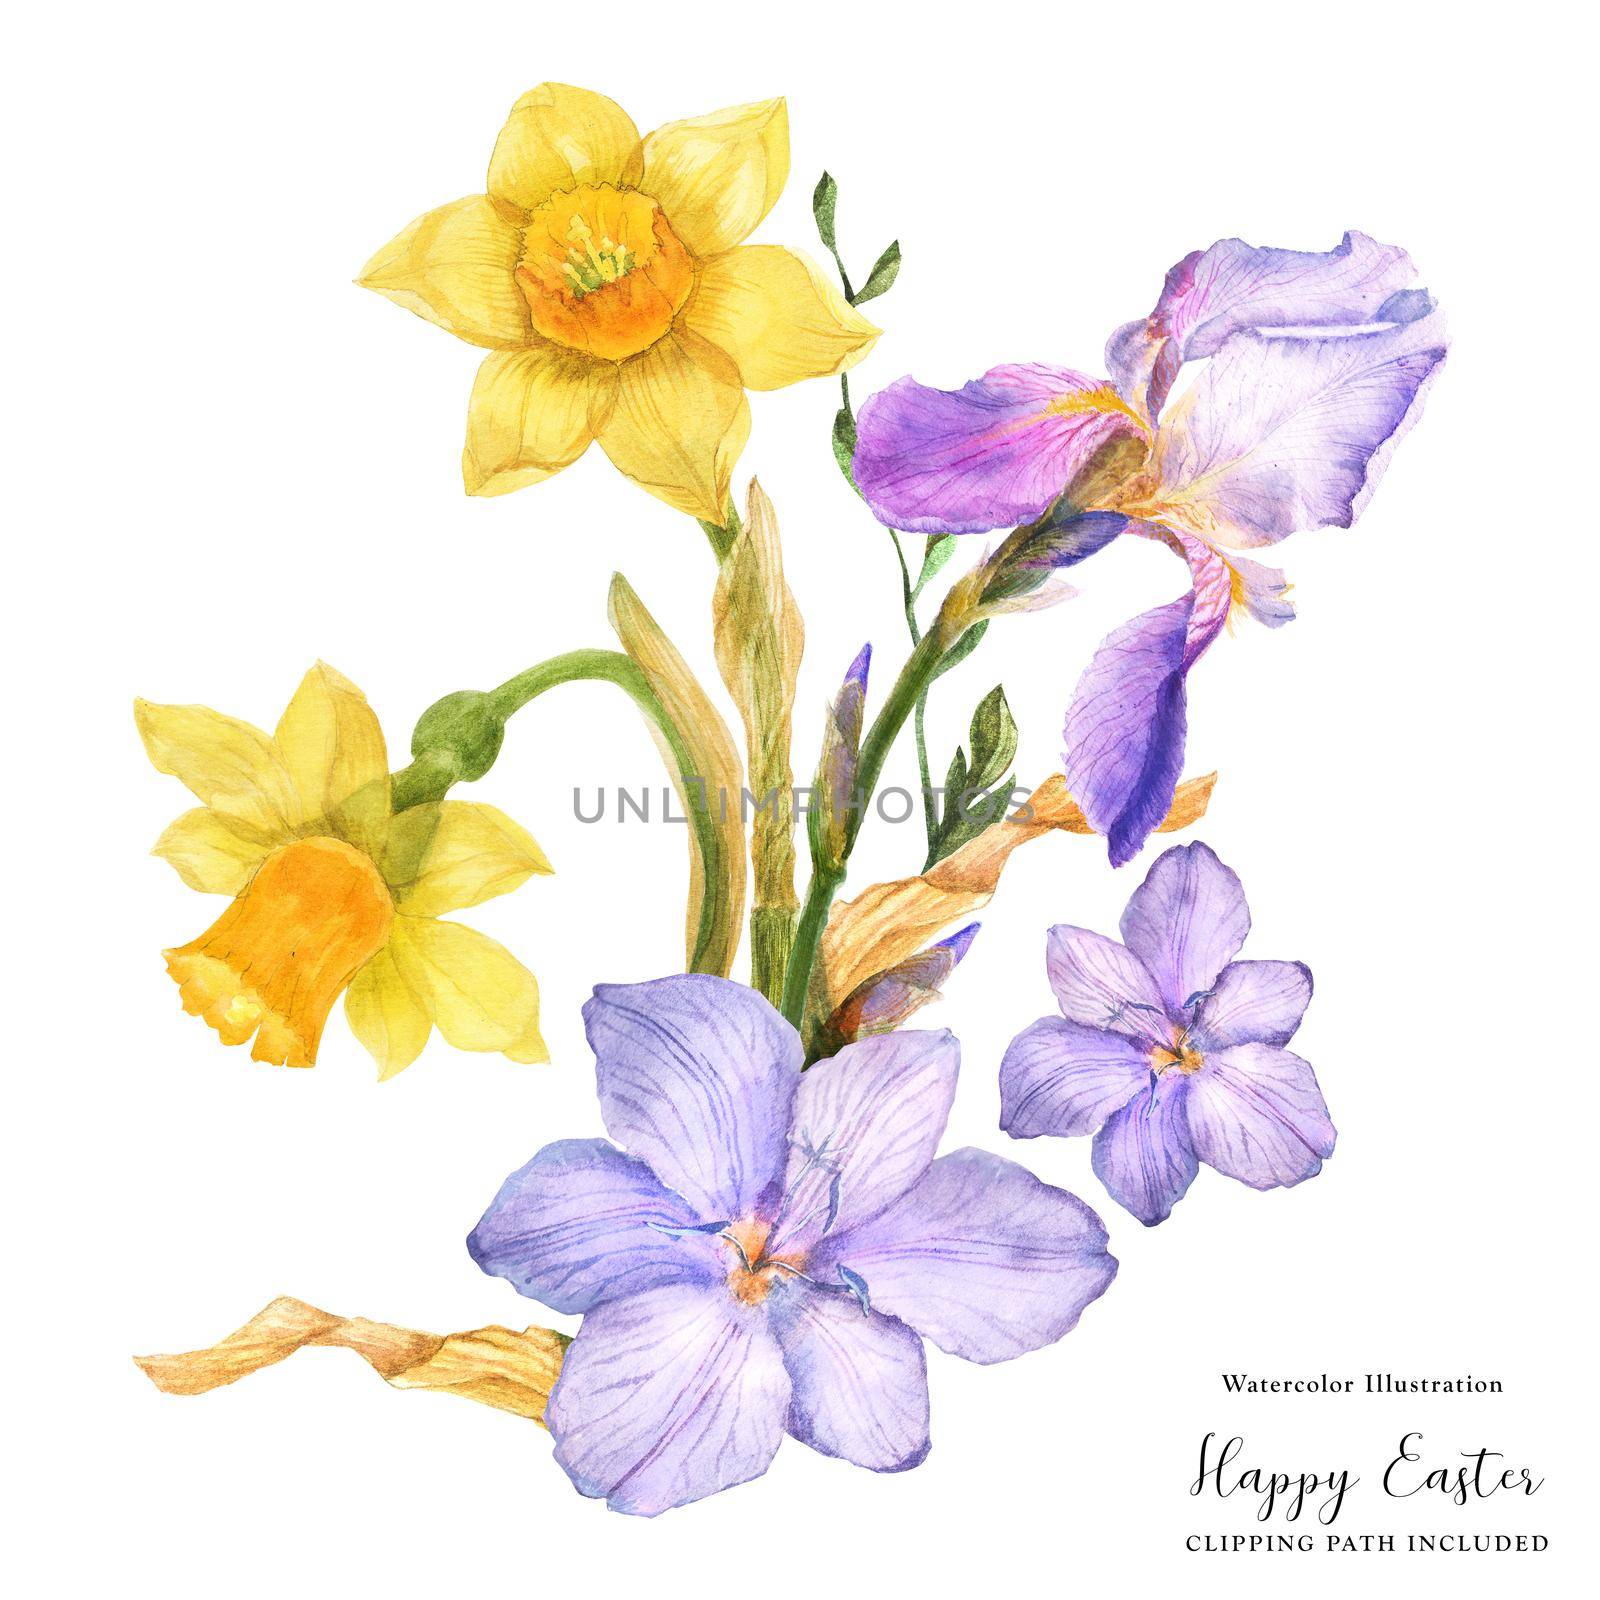 Decorative watercolor bouquet with spring flowers daffodil and iris and freesia on a white background, clipping path included